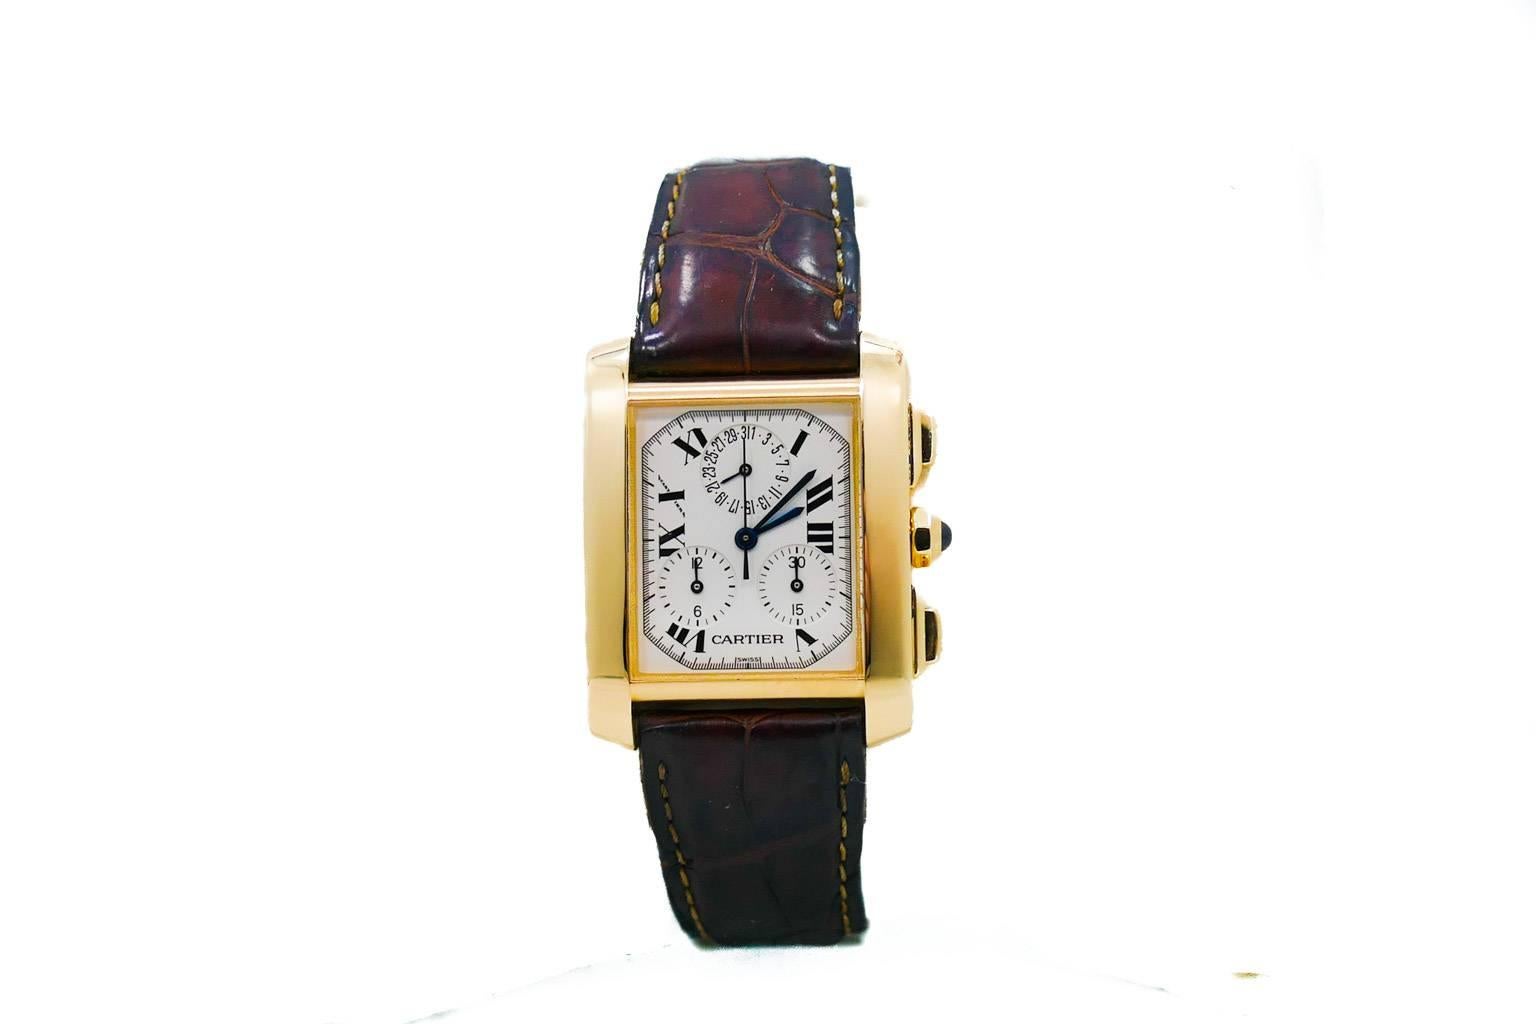 Mens Cartier Tank Francaise Chronograph in 18k Yellow Gold. The Watch is on a Worn Strap & 18k Buckle. The Watch was Just Polished and is in Great Condition and Working Excellently. No Box or Papers. The Watch is Guaranteed 100% Authentic Cartier.